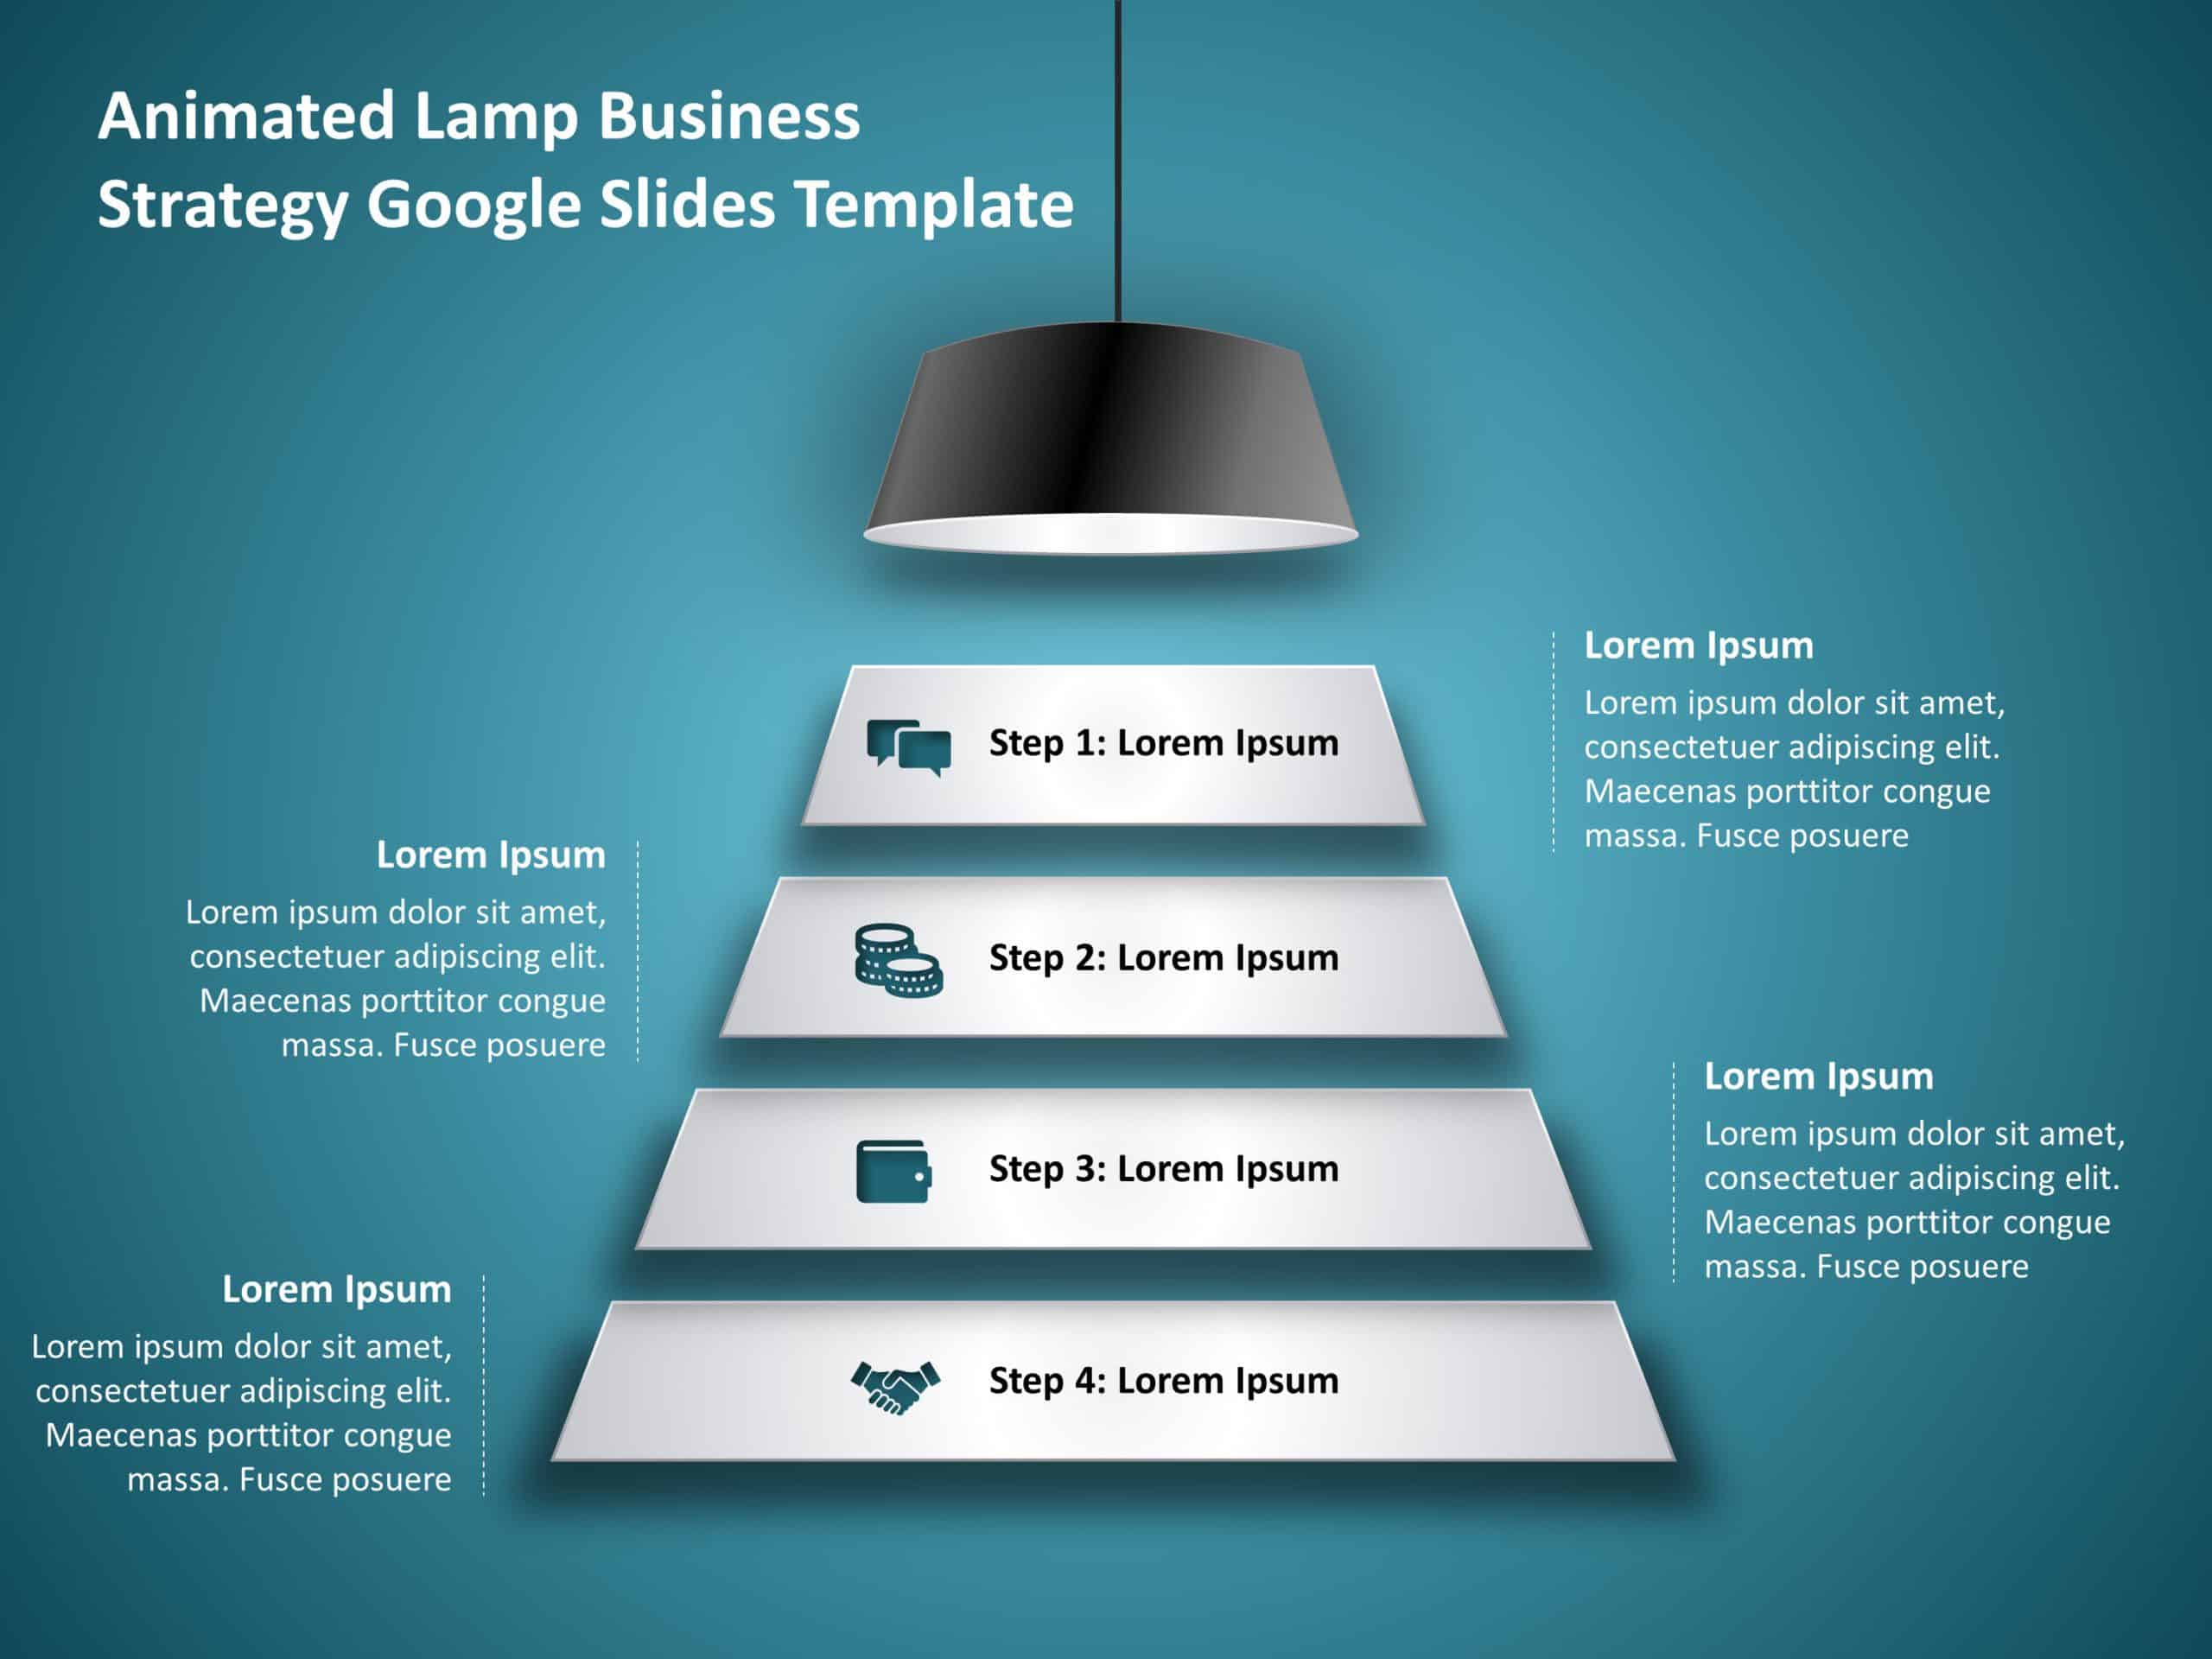 Animated Lamp Business Strategy Google Slides & PowerPoint Template